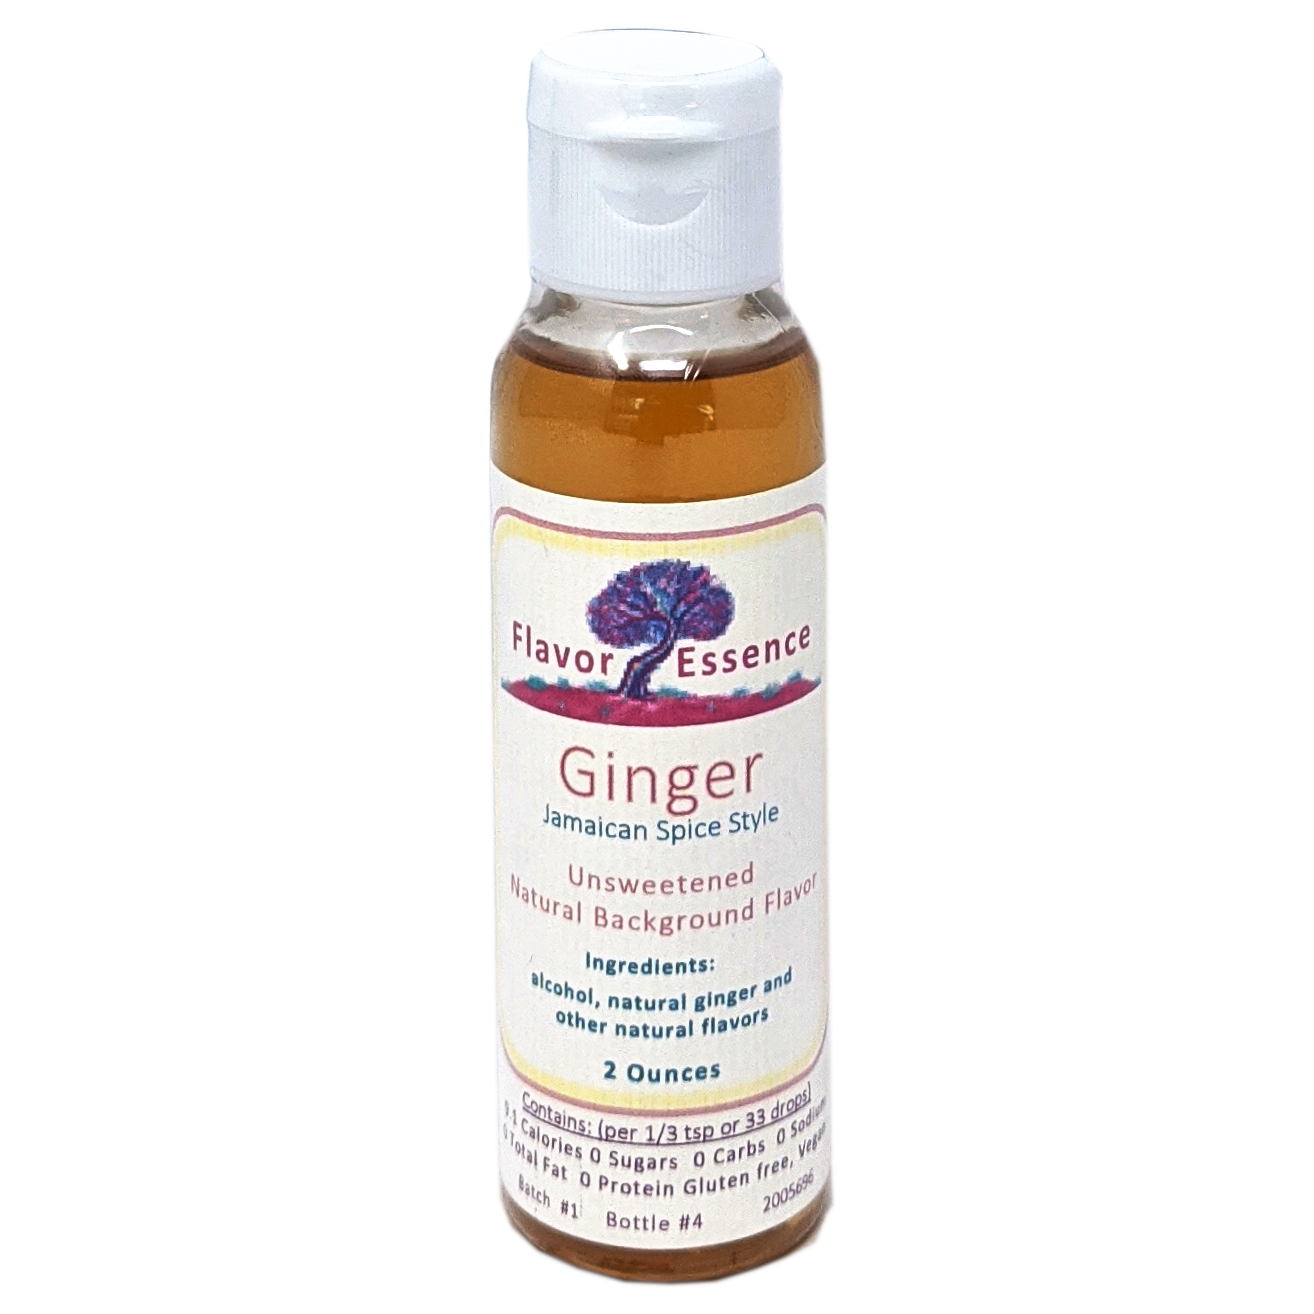 Flavor Essence Ginger 2oz - Natural Unsweetened Background Flavoring